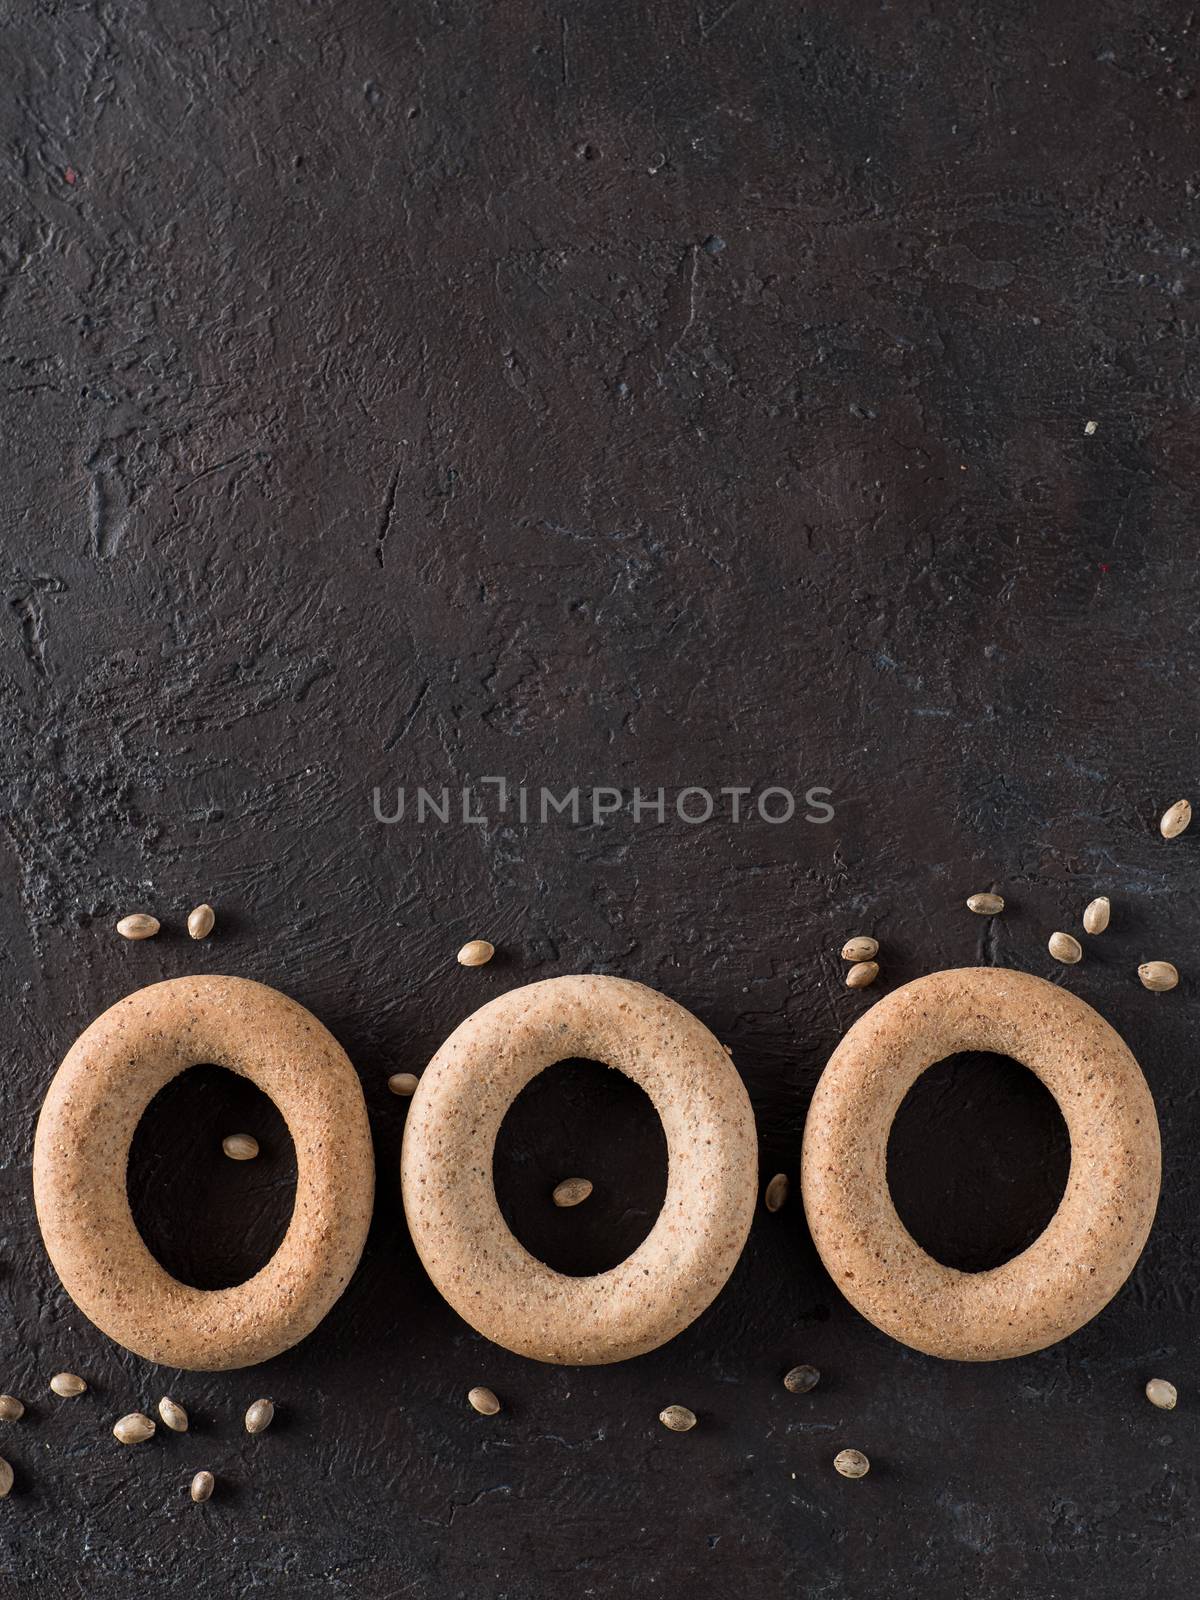 Ring-shaped cracknel with whole grain hemp seed flour and hemp seeds on black background. ring-shaped cracknel close up. Copy space Top view or flat lay. Vertical.